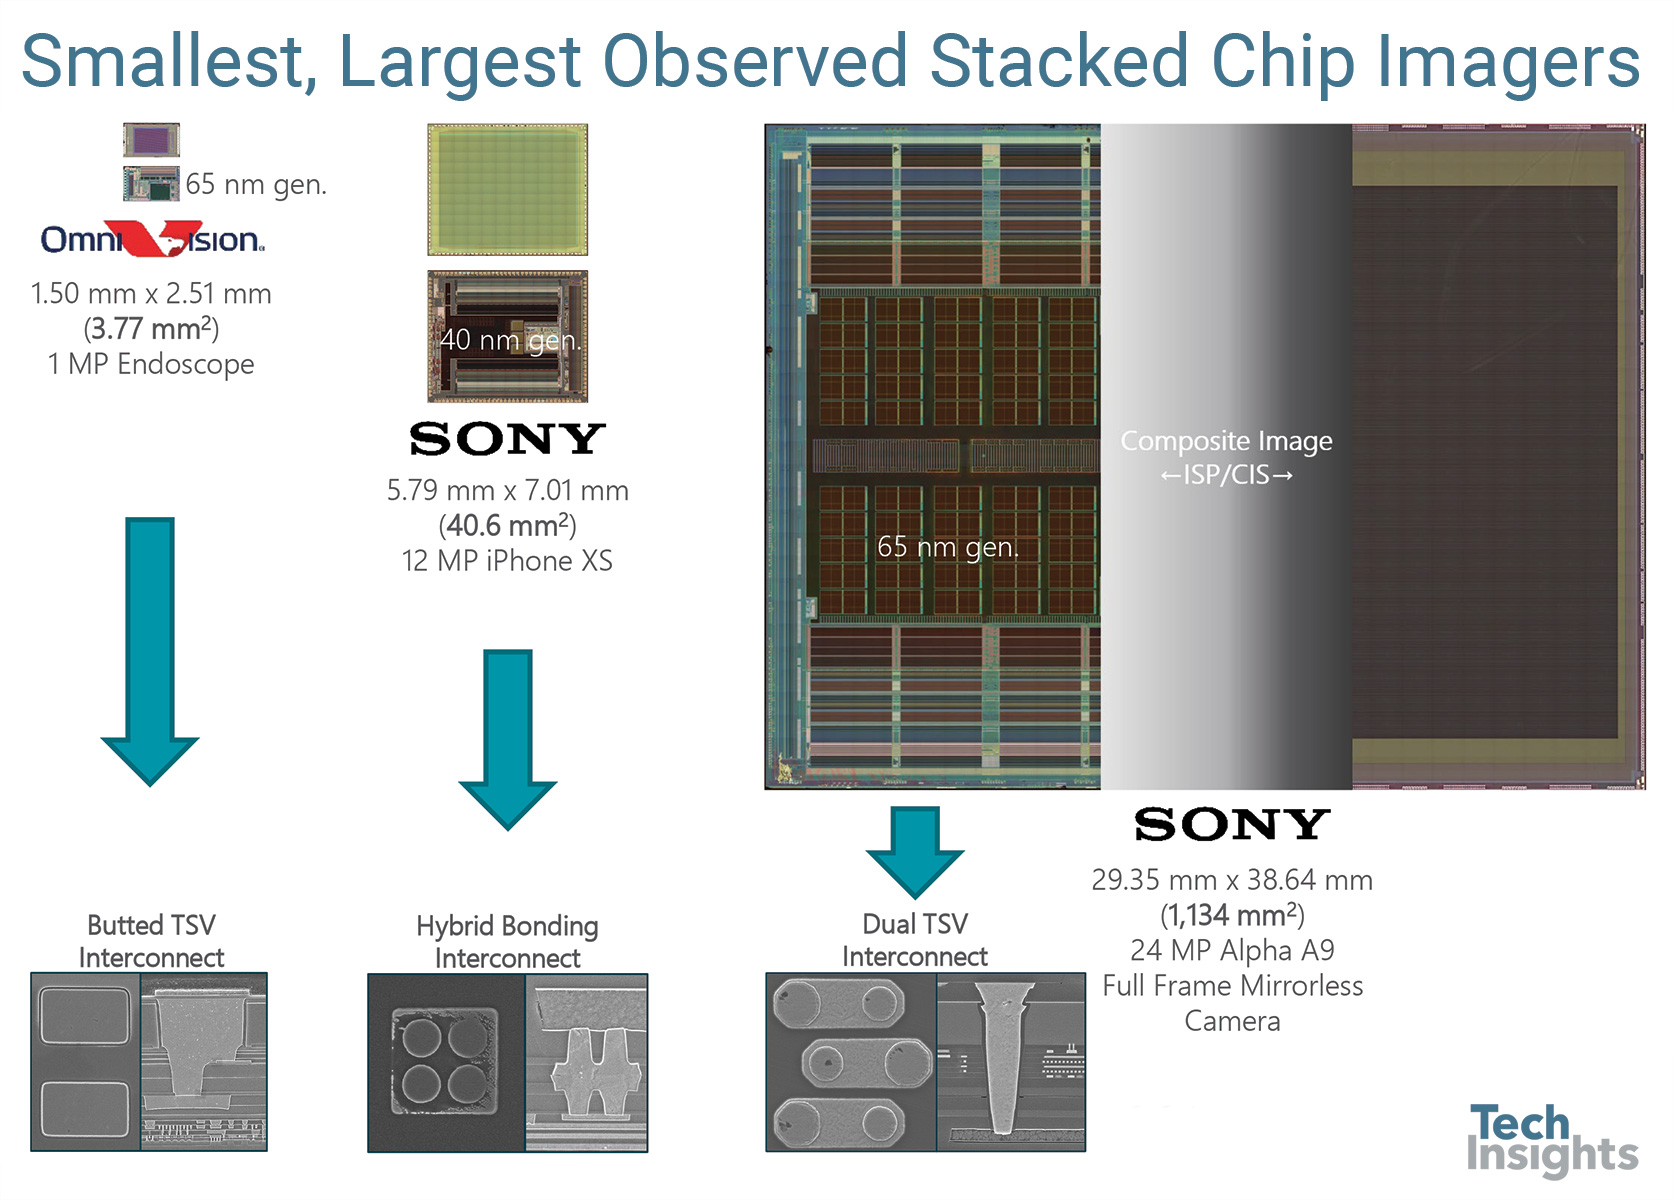 Smallest and largest observed stacked chip imagers